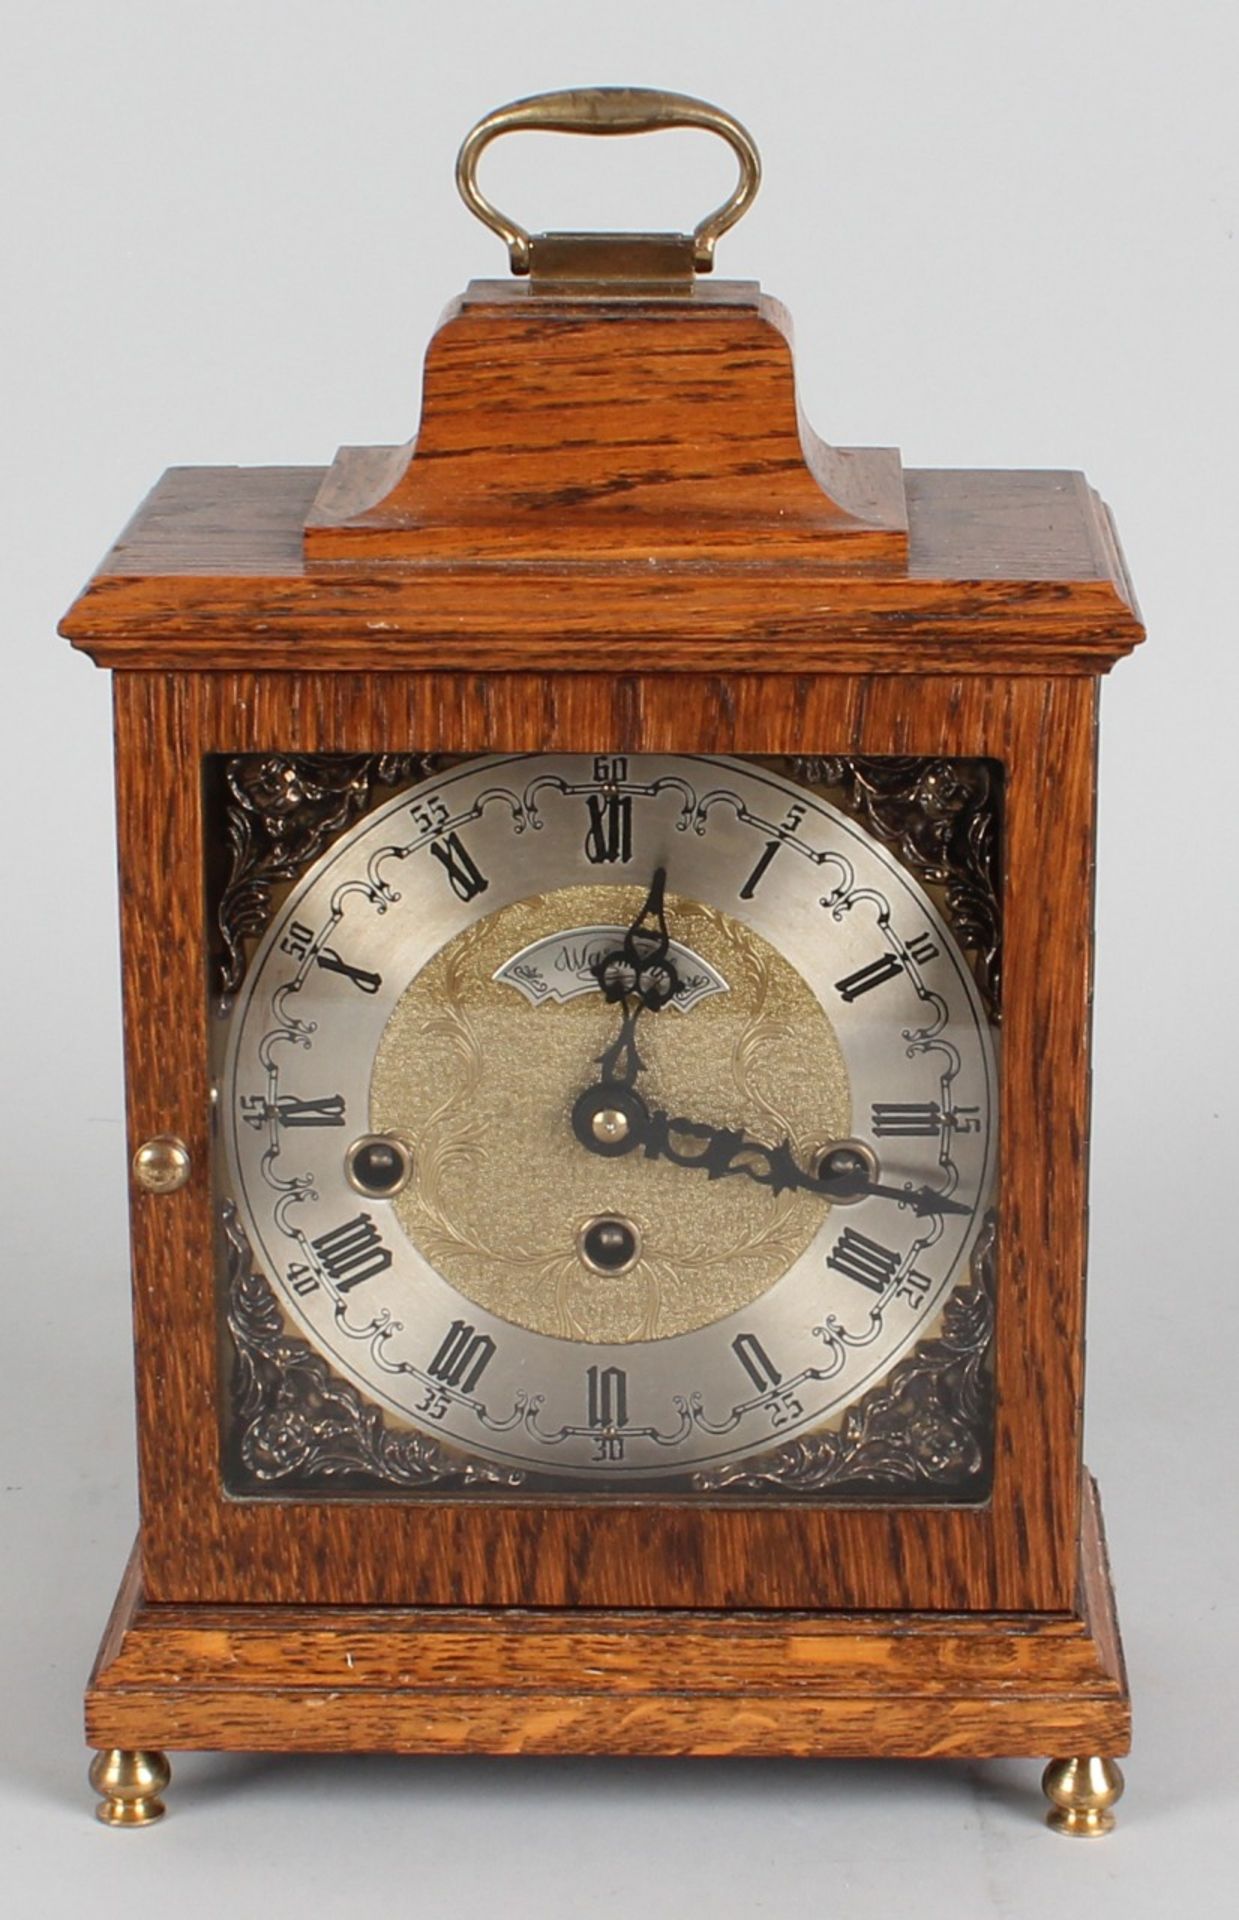 WUBA Westminster oak table clock with quarter striking 5-gong rods in good condition 31.5 cm wide